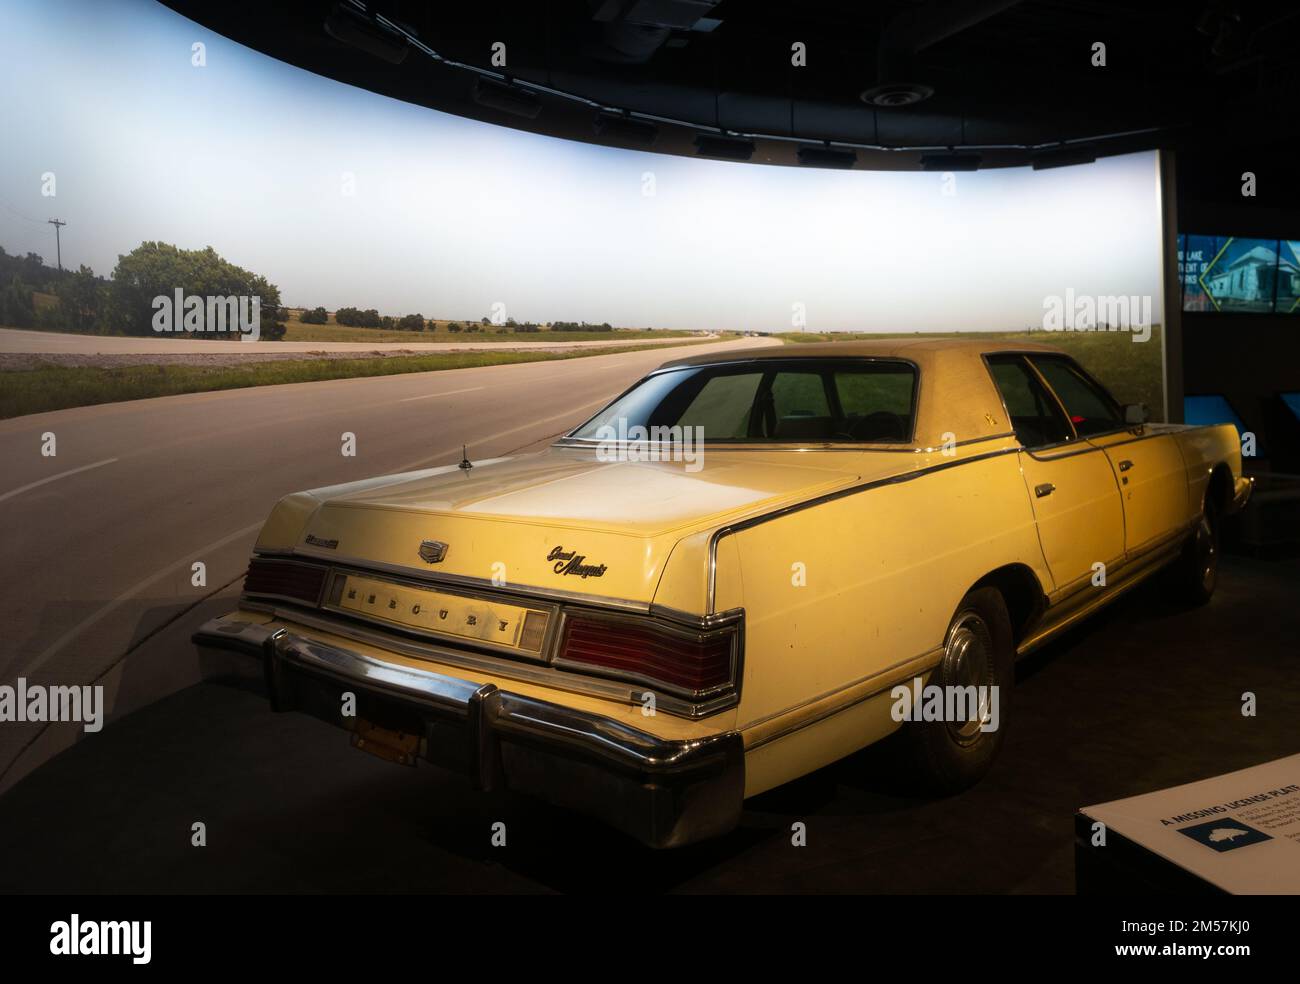 Timothy McVeigh's getaway car, a yellow Mercury Grand Marquis, displayed in the Oklahoma City National Memorial Museum in Oklahoma City. Stock Photo